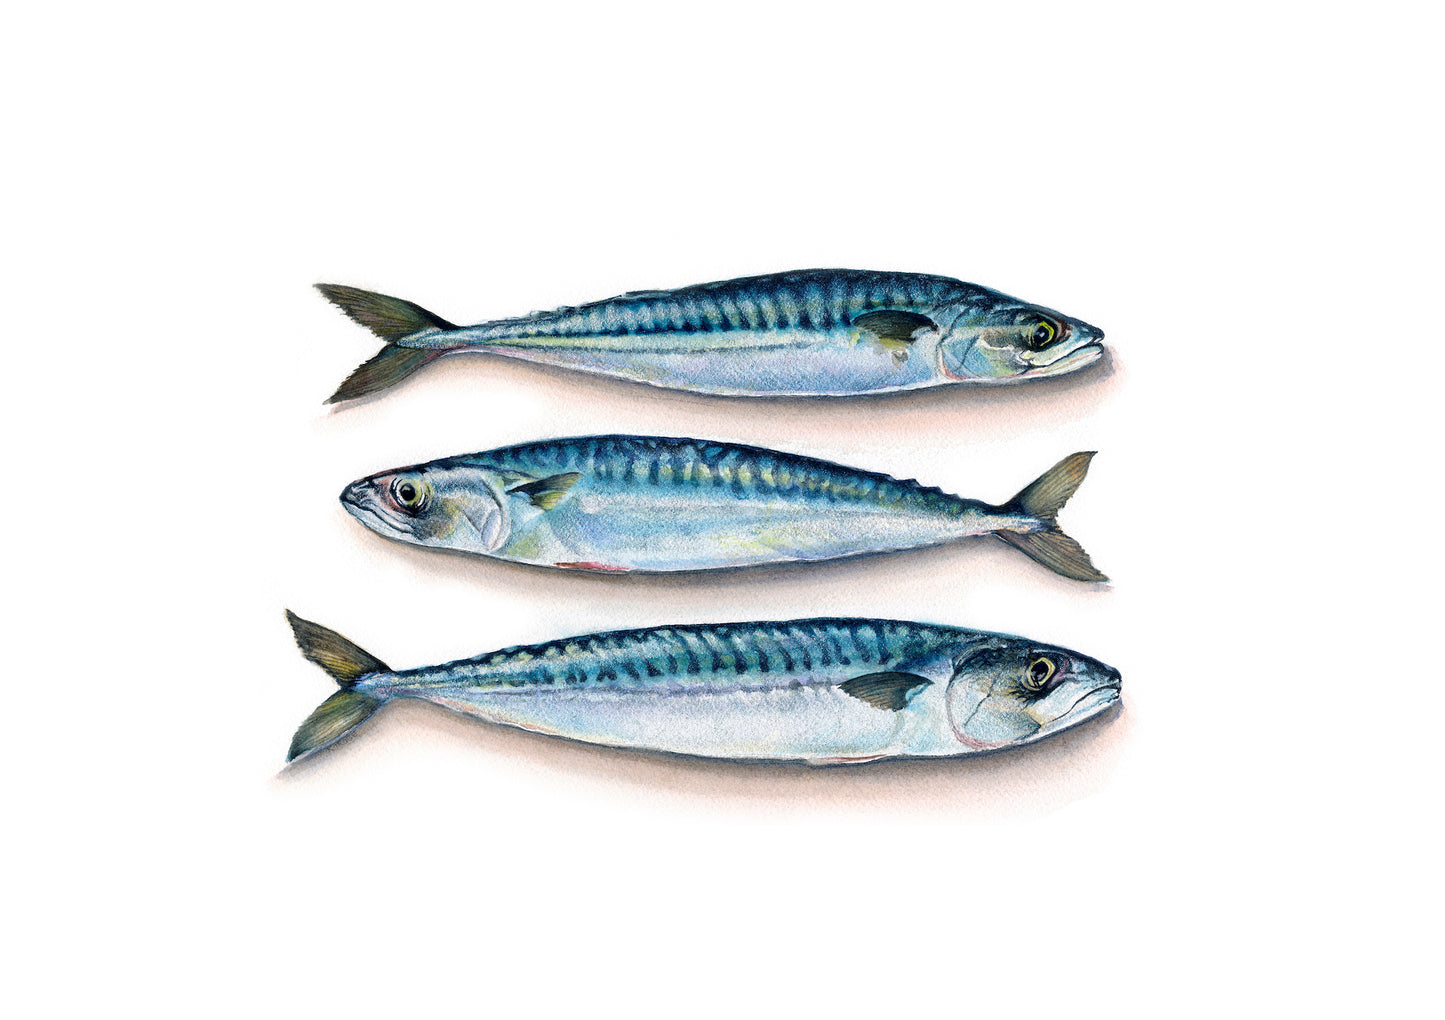 Three Mackerel depicted on a white background, facing alternate directions. The fish are painted in a realistic style and are hand finished with iridescent paint. There is a subtle shadow under each fish in a contrasting pale pink/brown tone.